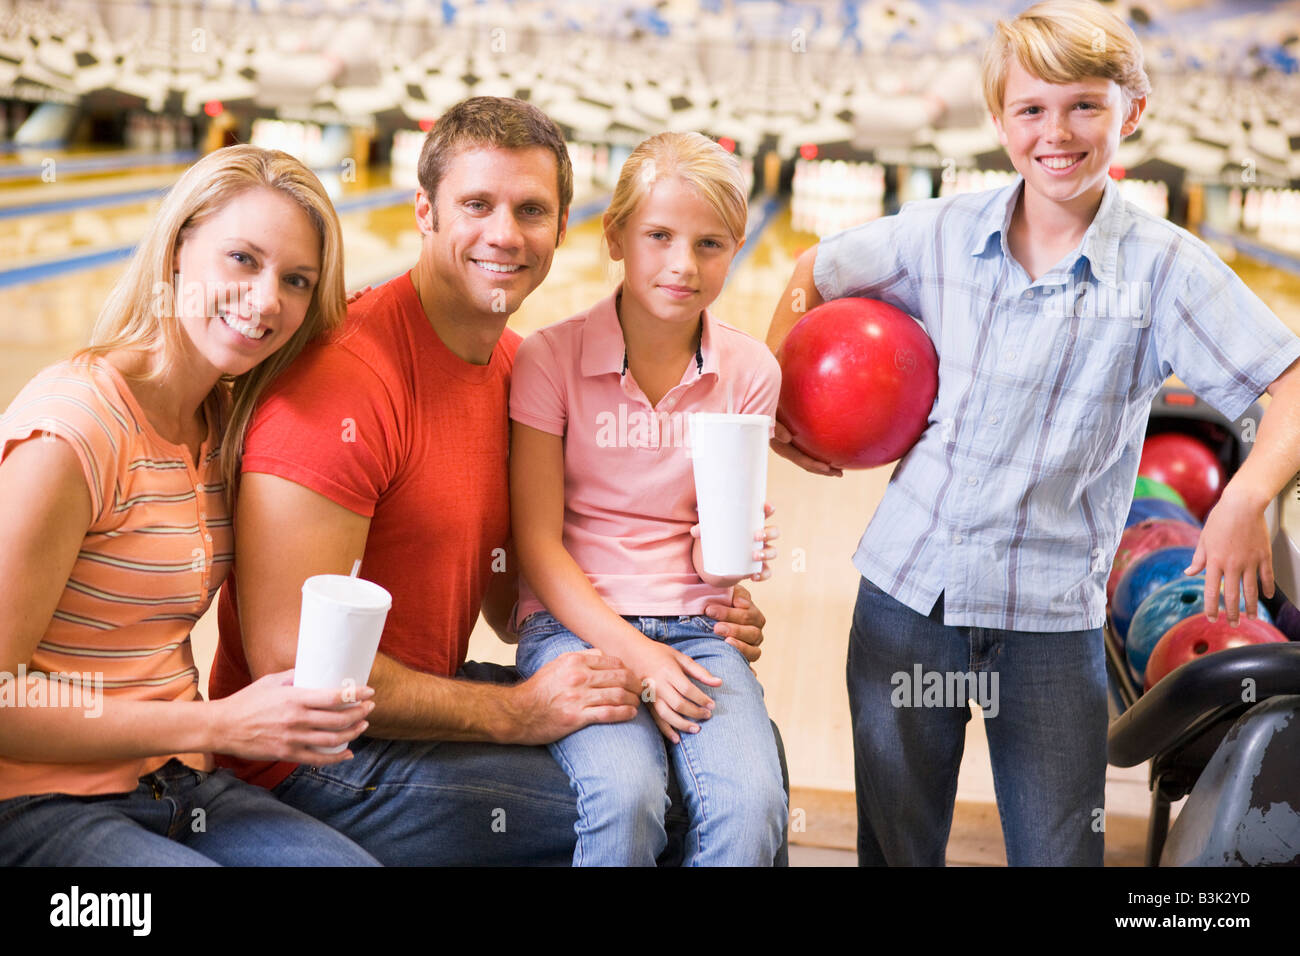 Family in bowling alley with drinks smiling Stock Photo